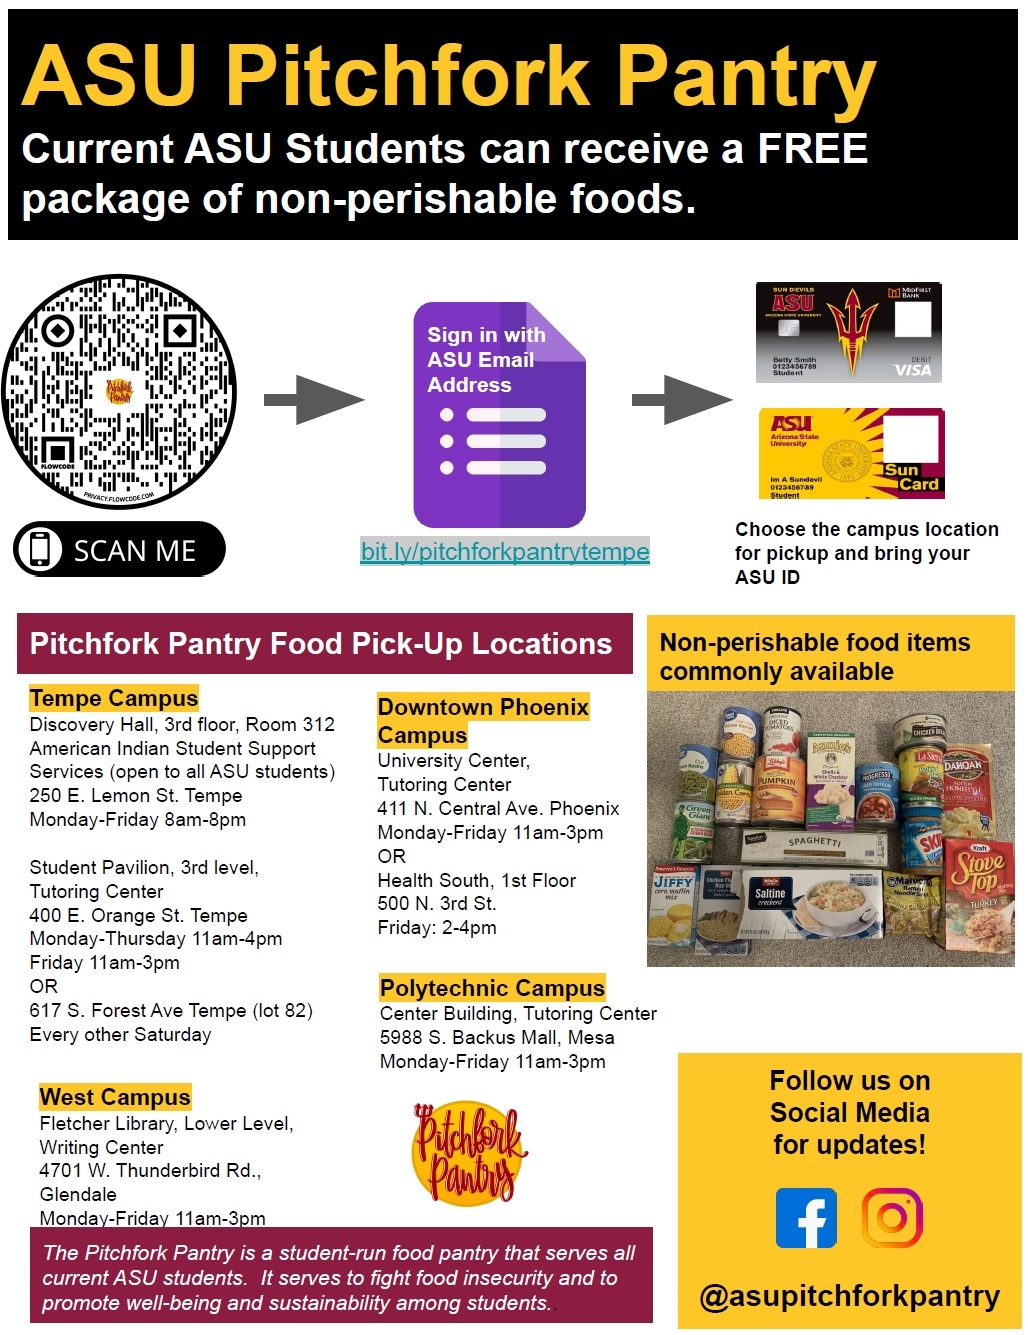 ASU food pantry provides for students in need